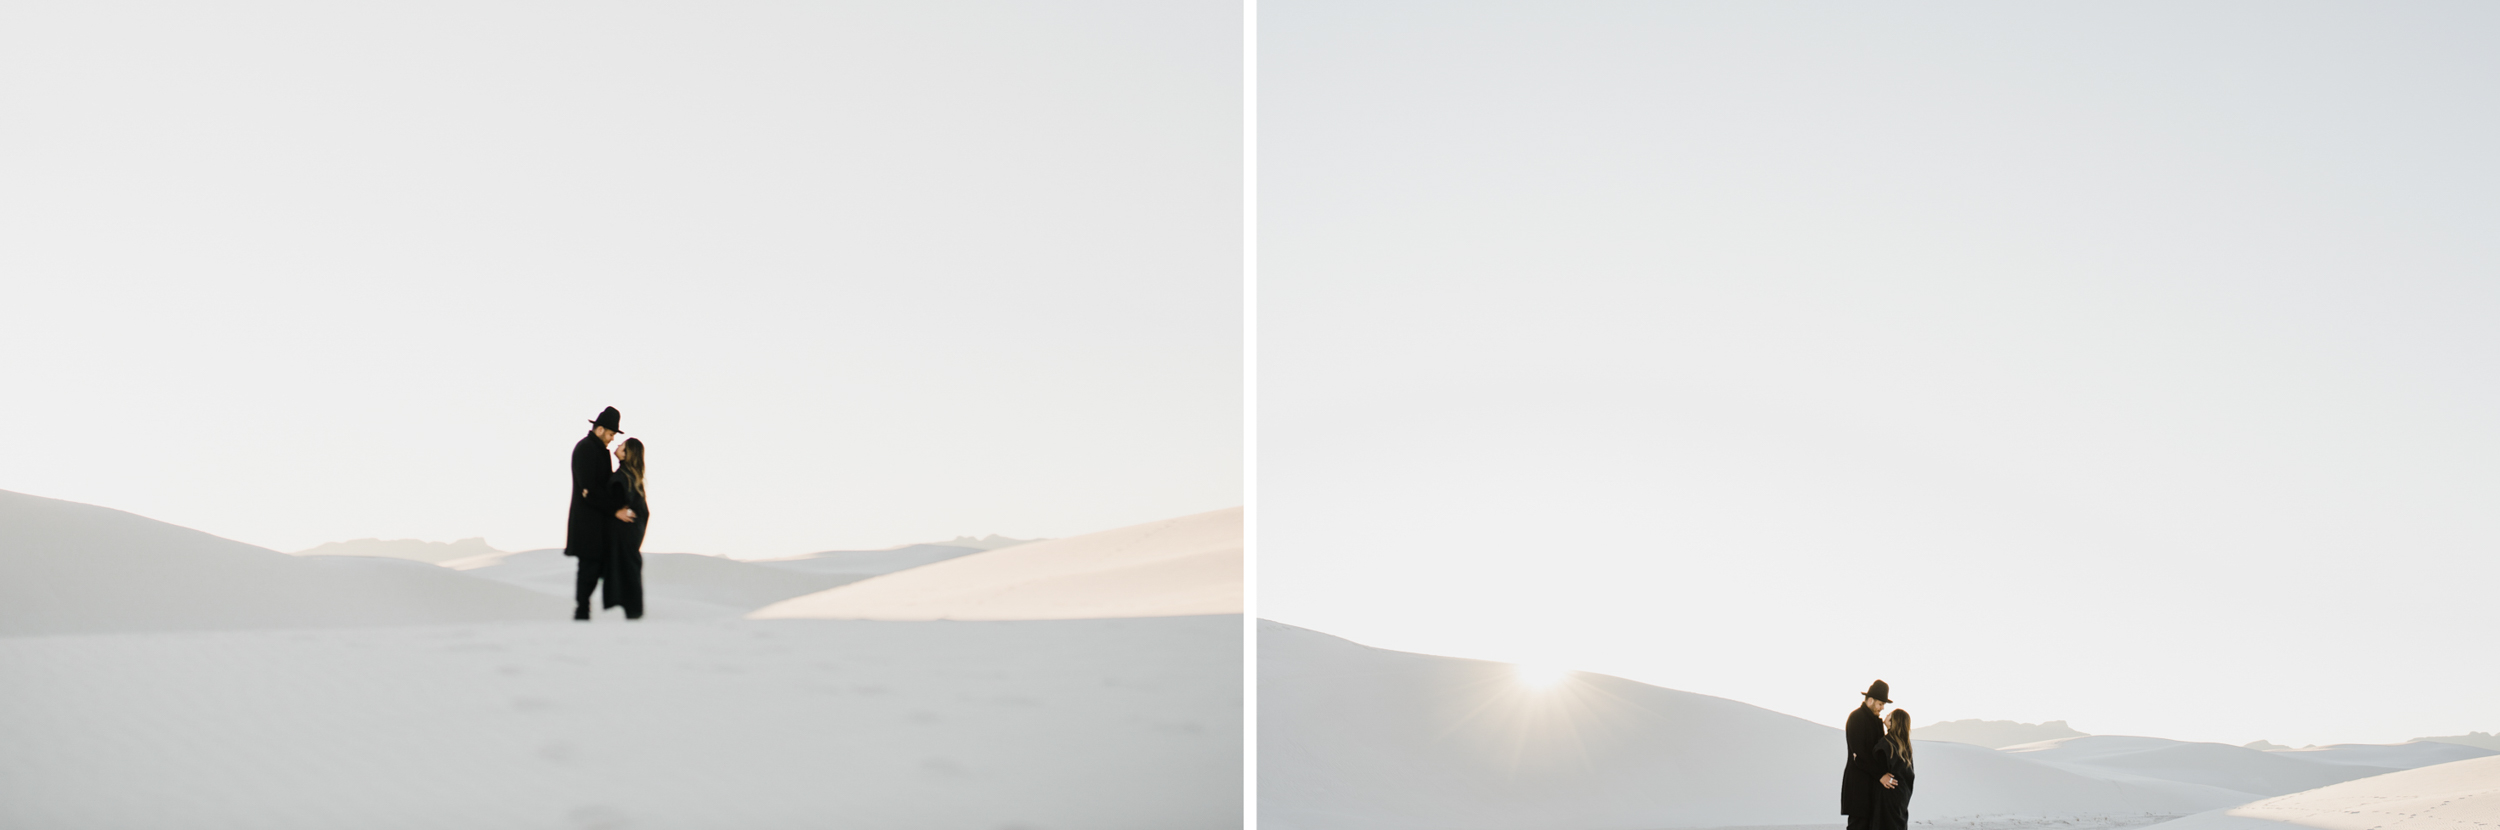 ©Isaiah & Taylor Photography - White Sands Natioanl Monument, New Mexico Engagement-057.jpg